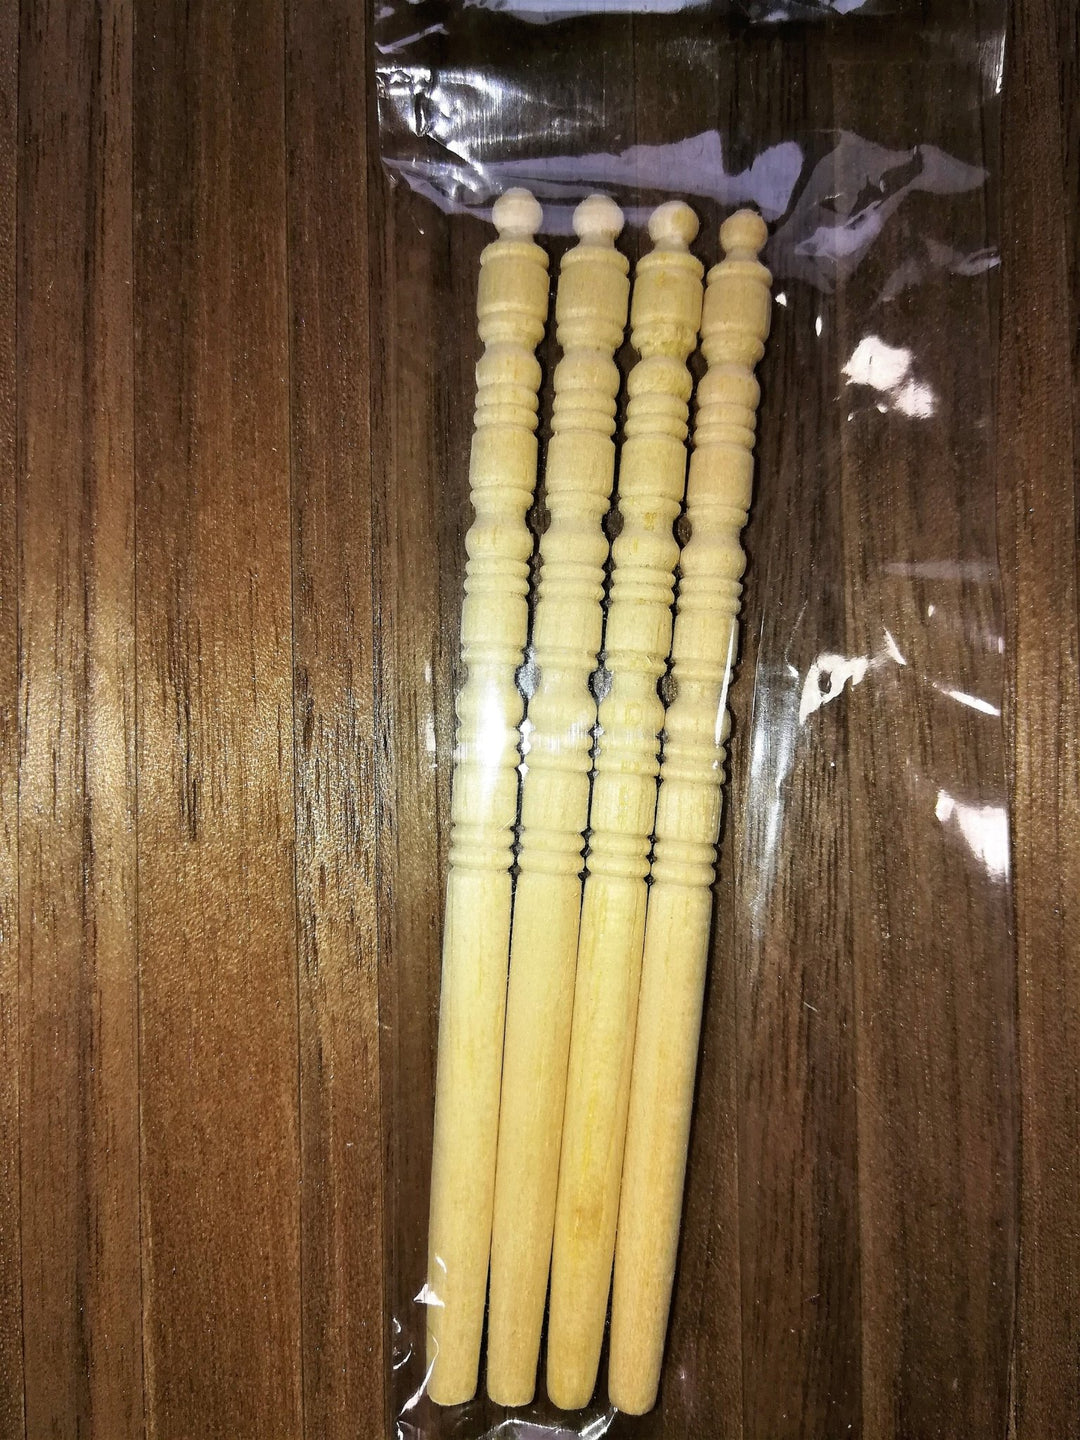 Dollhouse Miniature Spindles Wood for Building 4 Pieces 1:12 Scale 3 3/4" Long - Miniature Crush